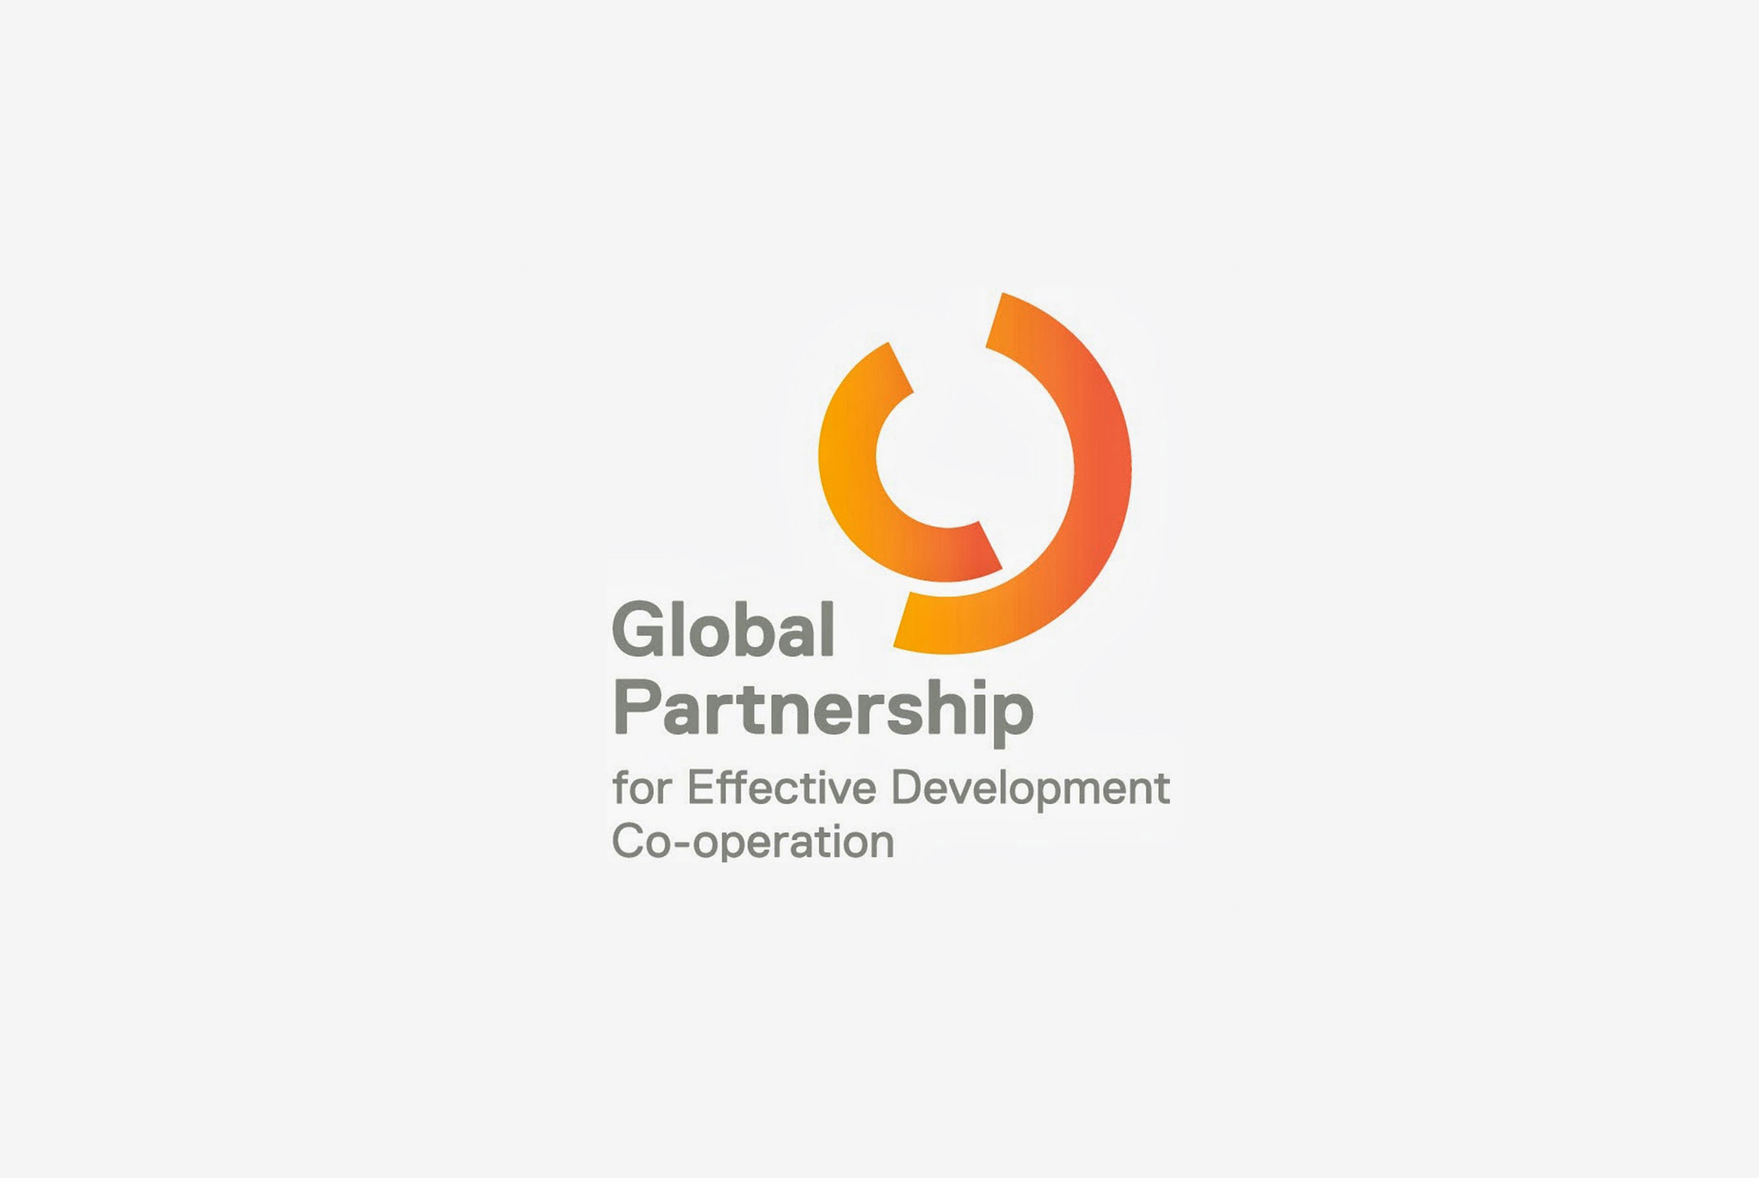 GOPAC has been selected as the Steering Committee of the Global Partnership for Effective Development Cooperation (GPEDC), representing the Parliamentary Community.